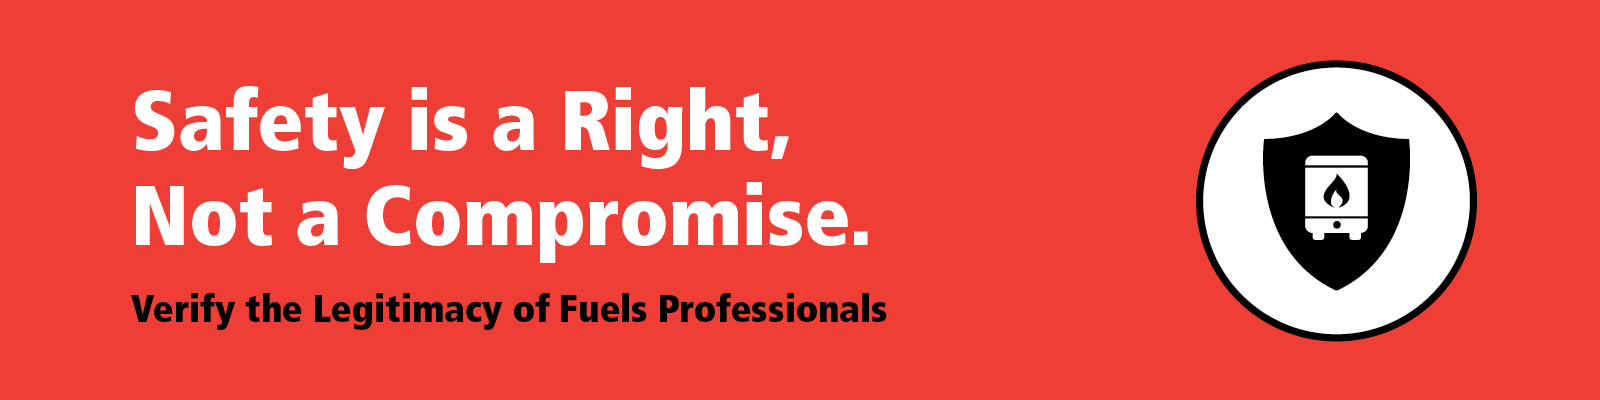 TSSA Banner that states safety is a right - not a compromise - Verify the legitimacy of fuels professionals